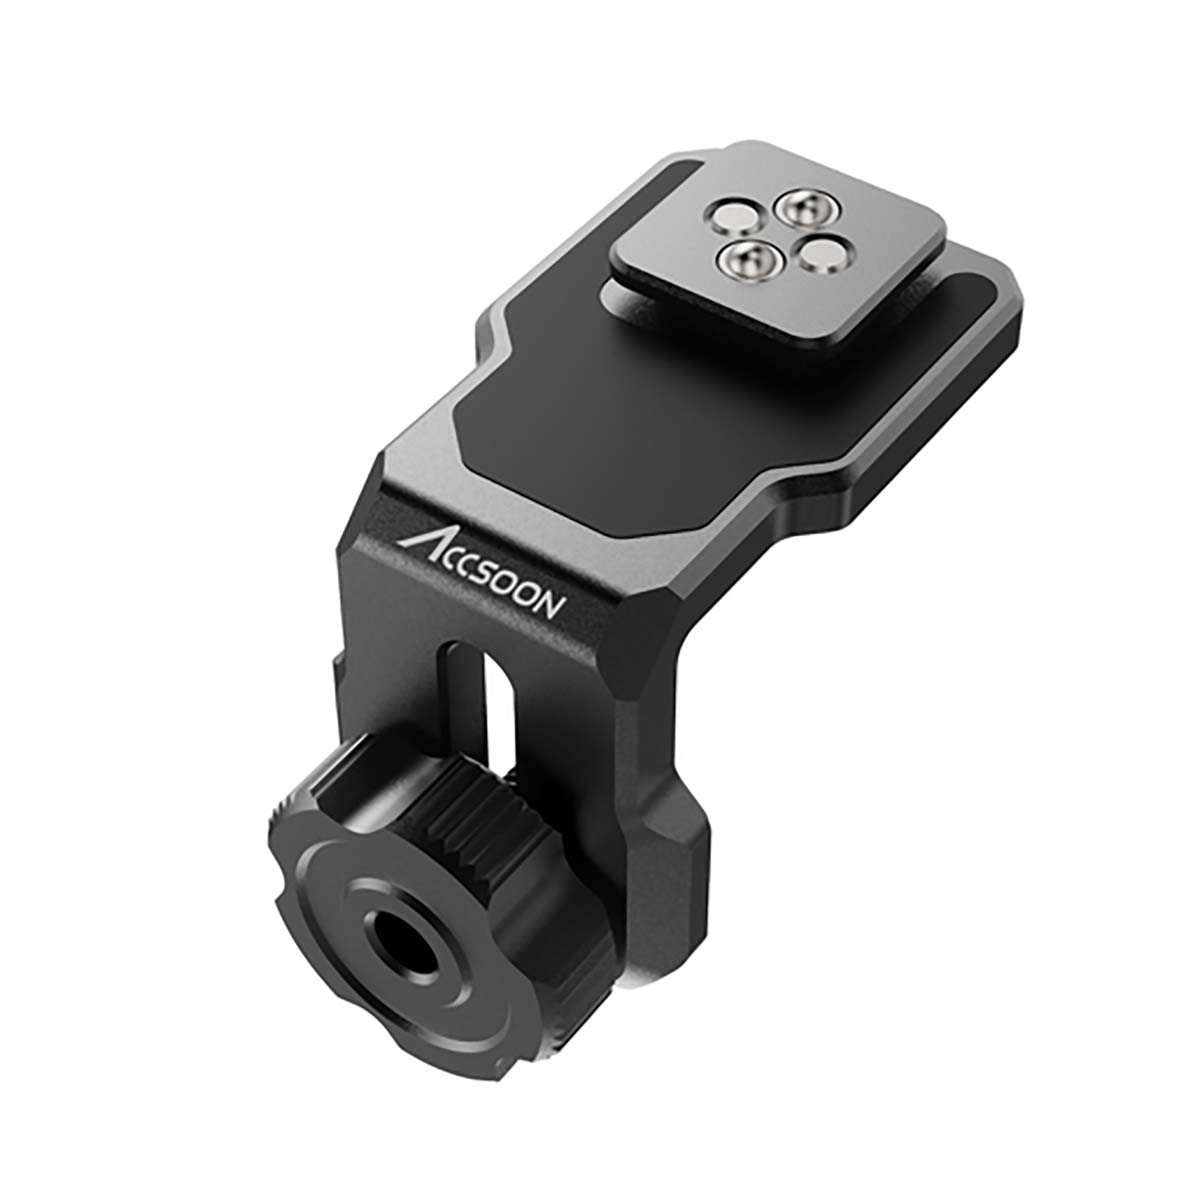 Accsoon Adapter für Gimbal ACC02